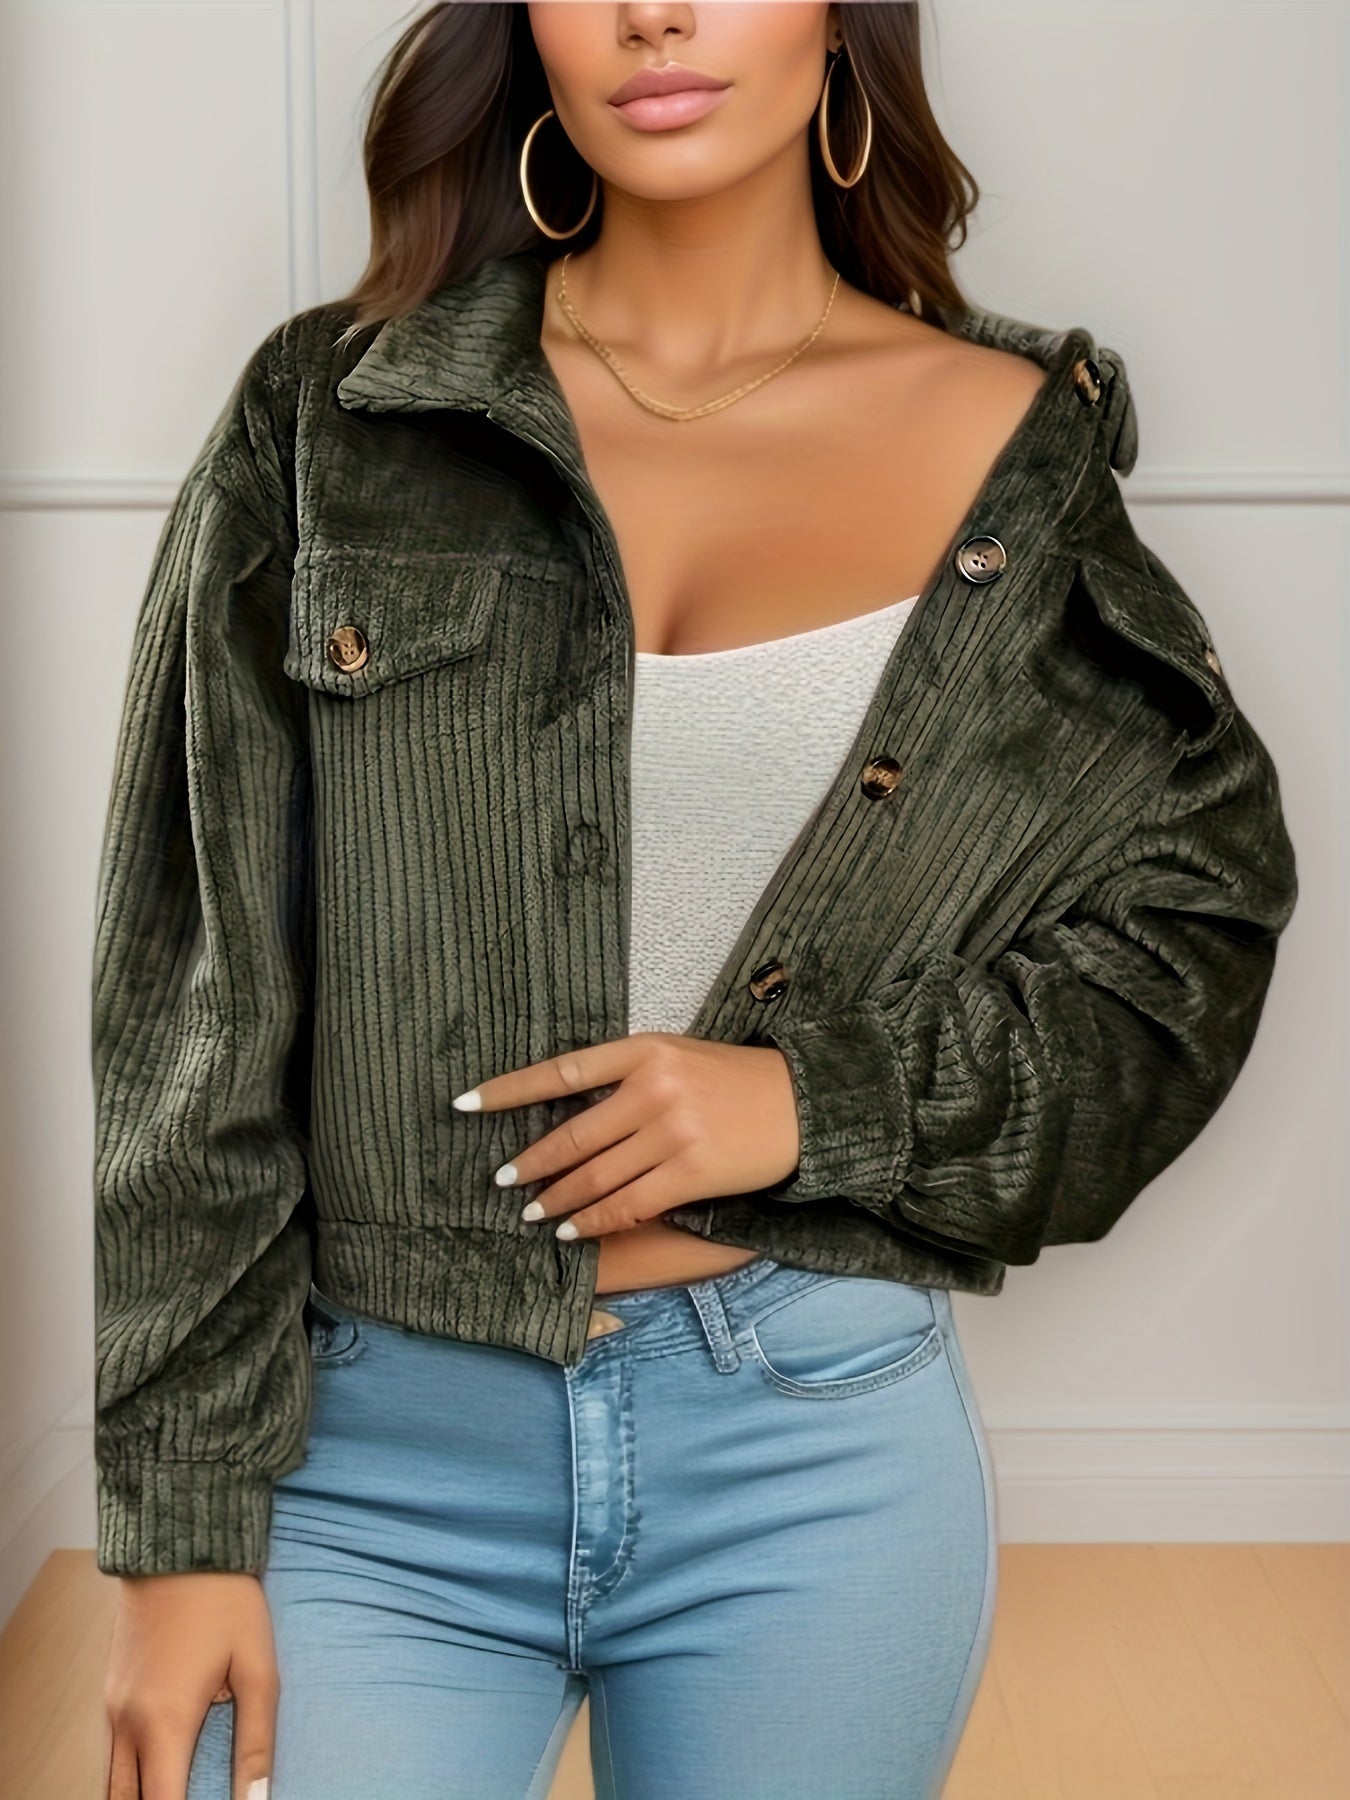 Solid Corduroy Button Front Jacket, Casual Long Sleeve Outwear For Spring & Fall, Women's Clothing